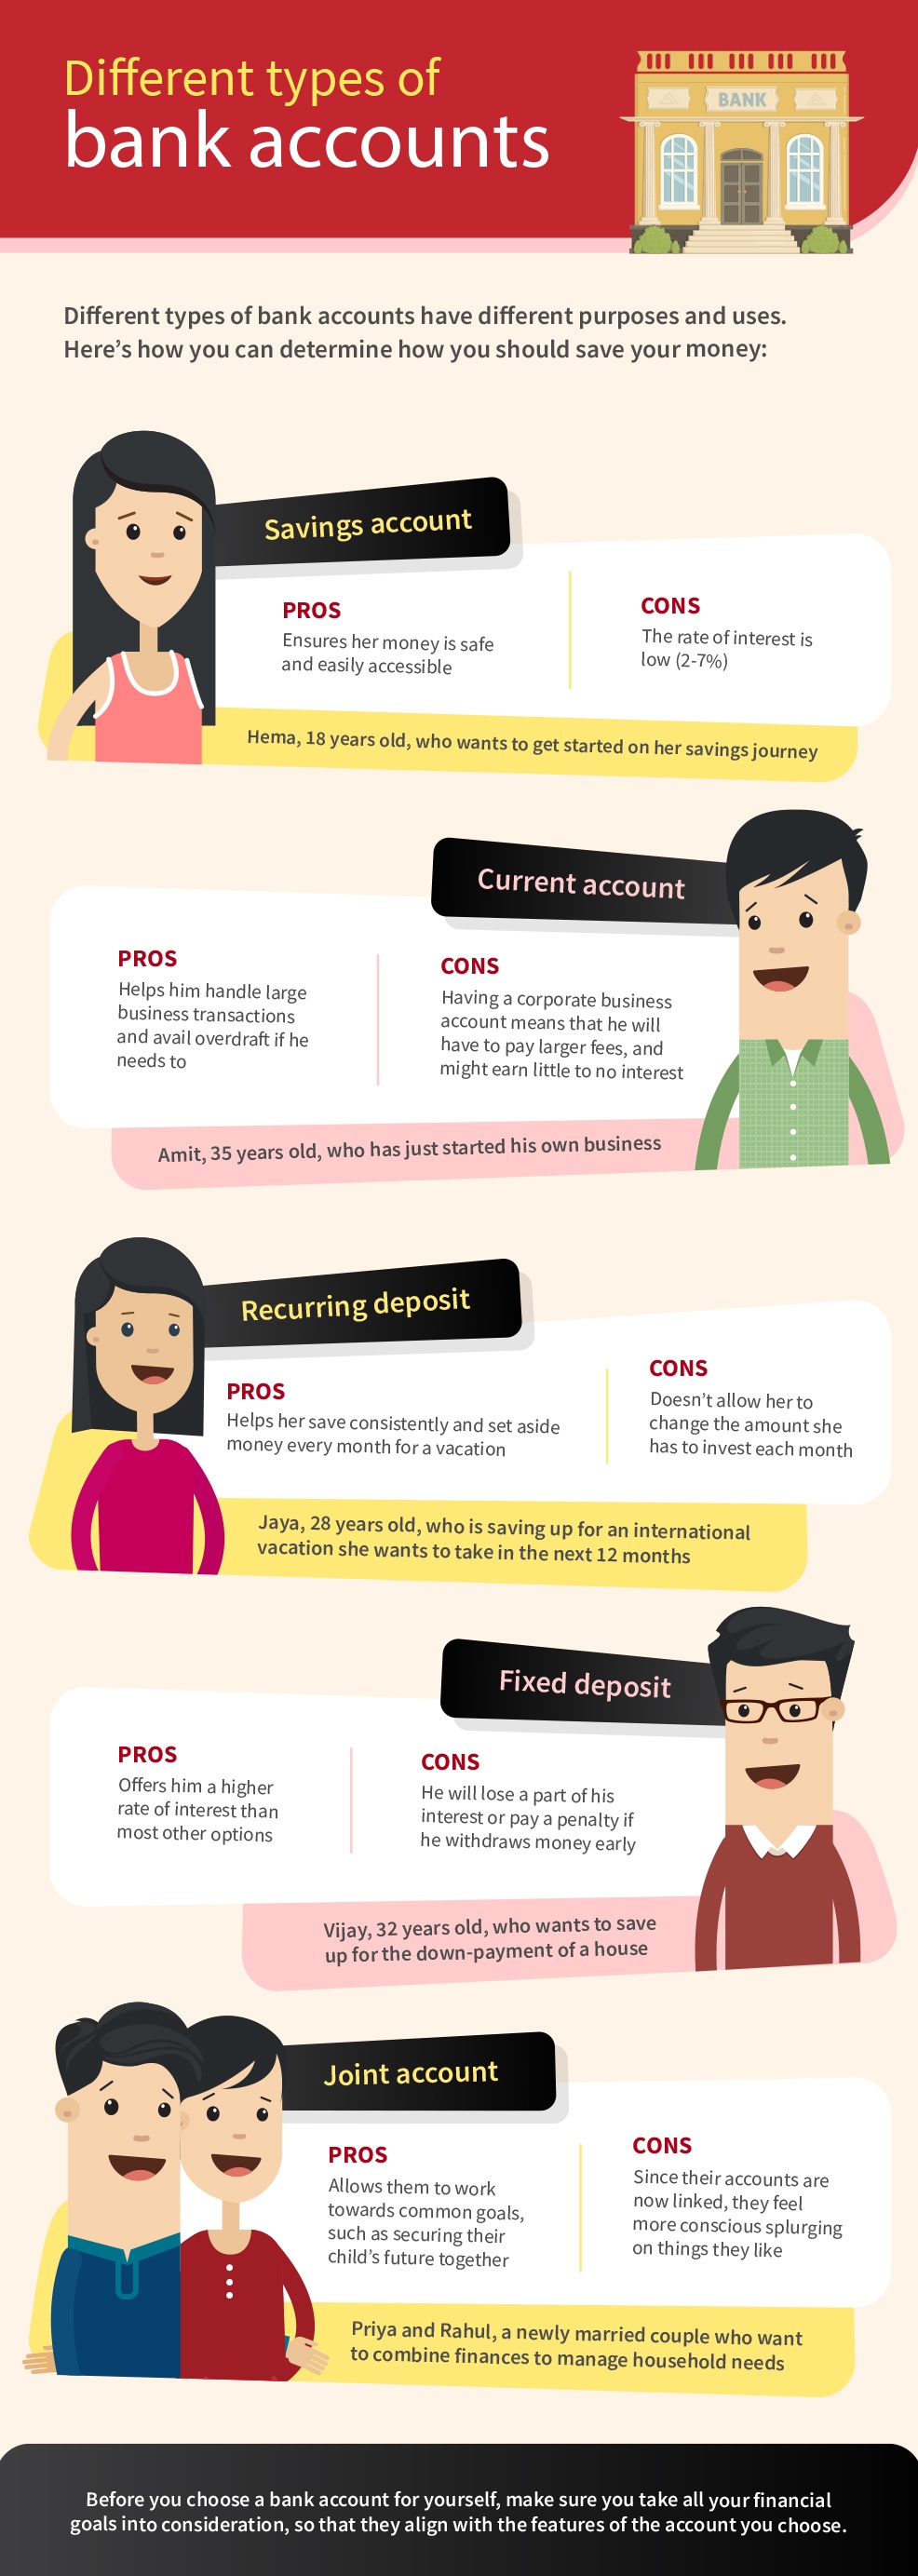 Different types of bank accounts